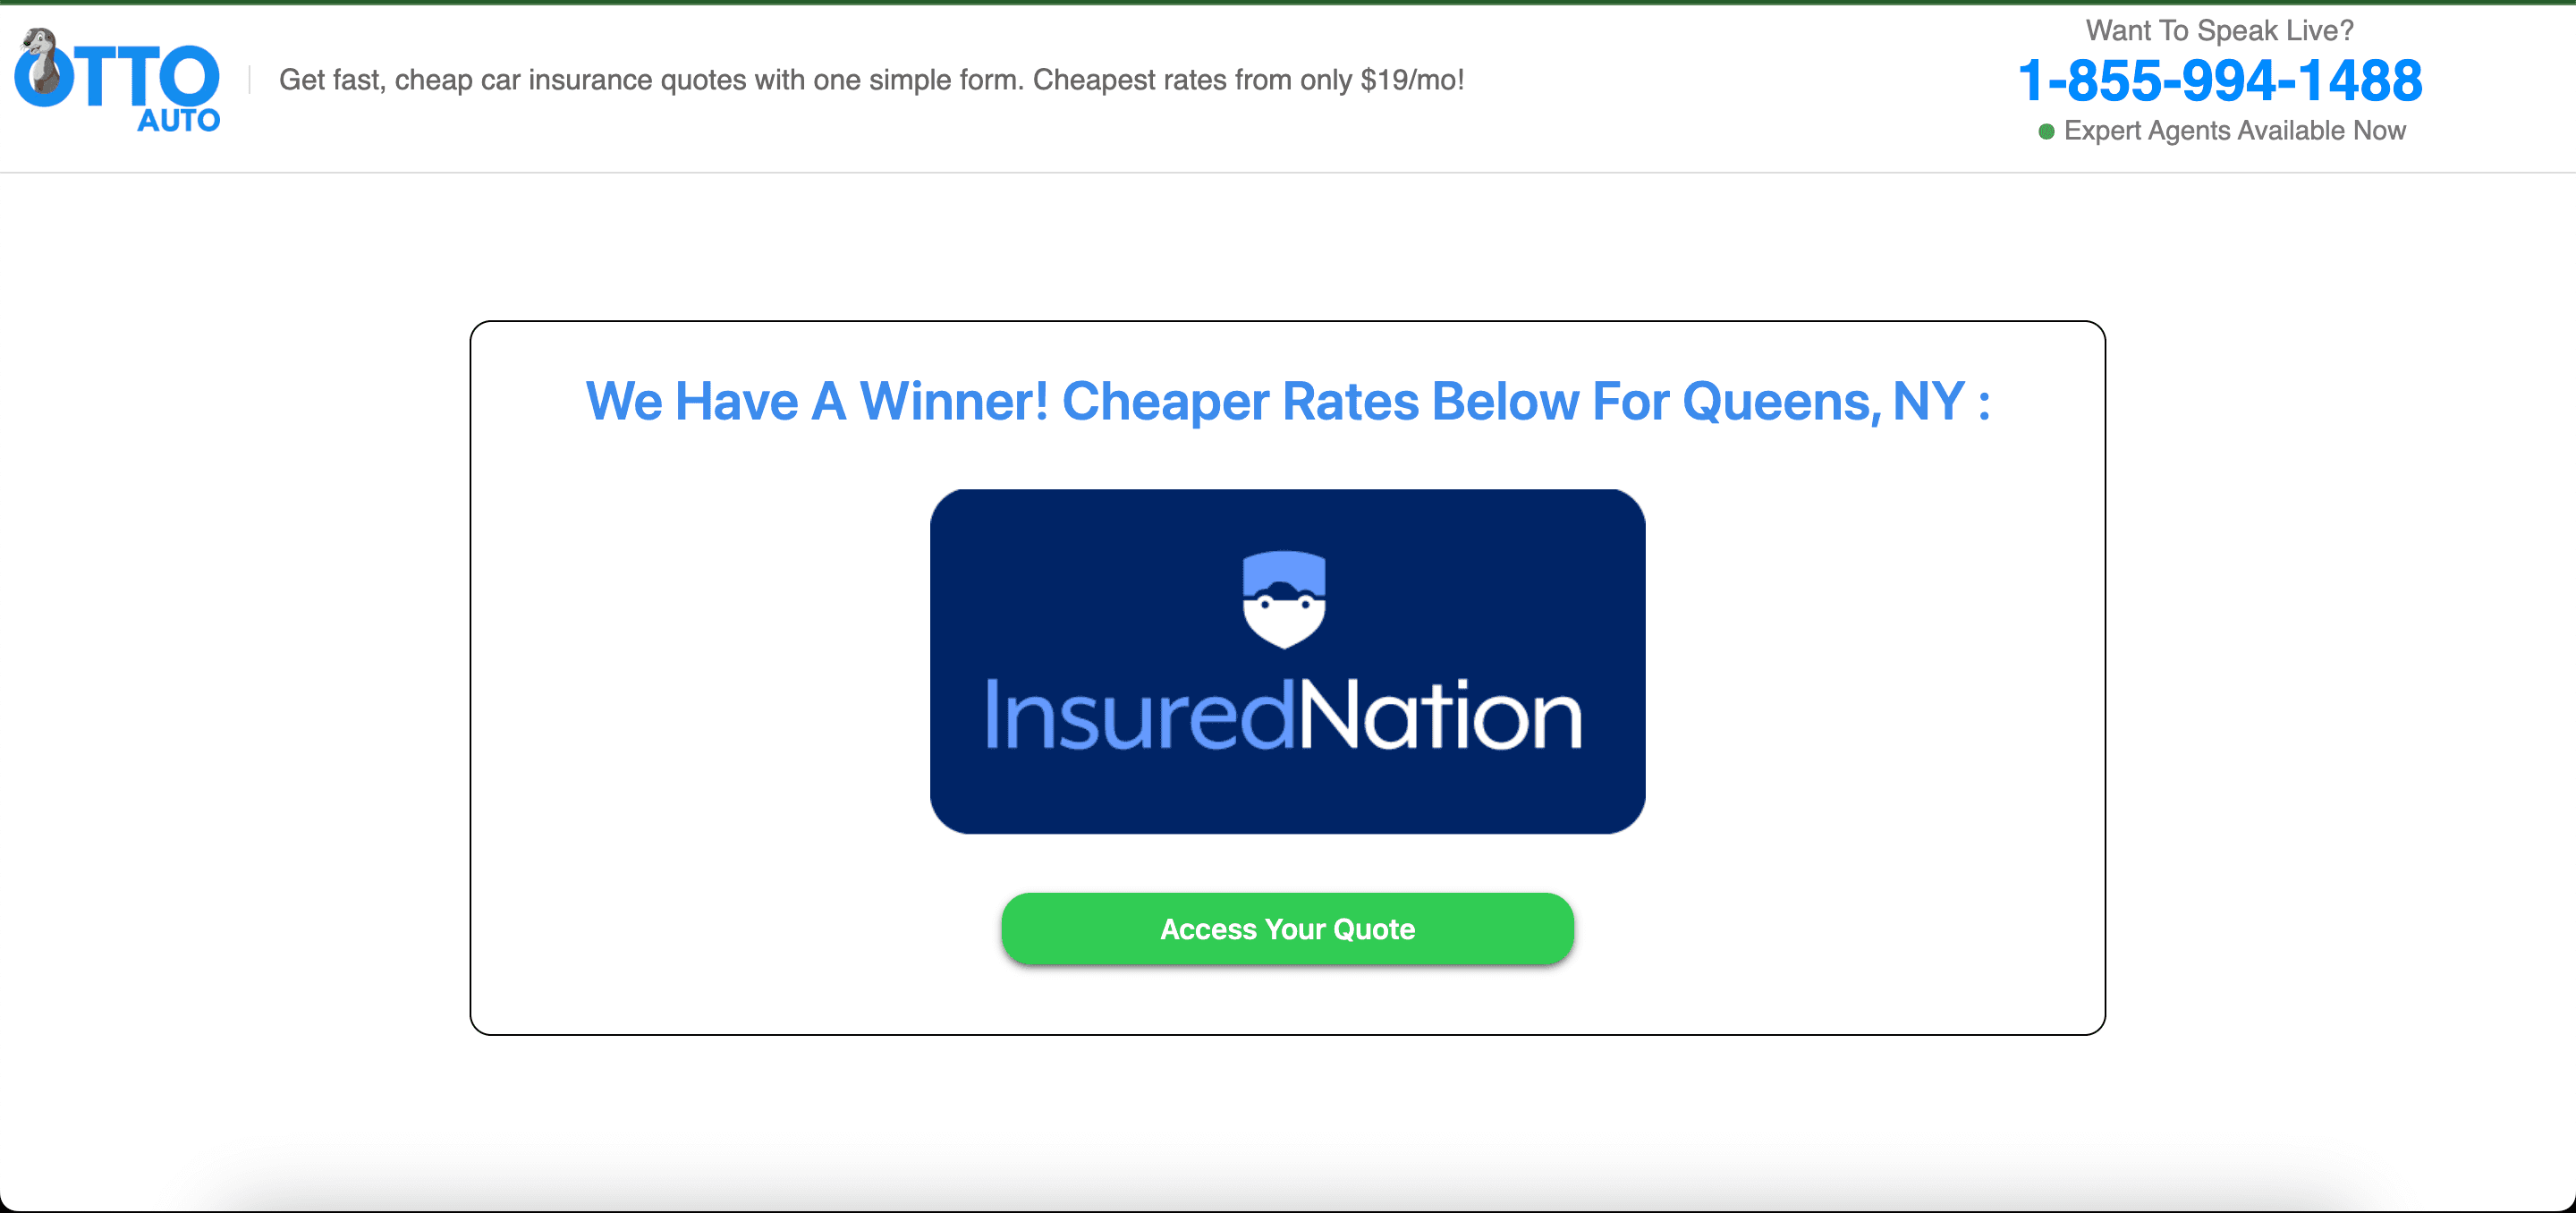 Otto Auto Article Screenshot of one winner from Insured Nation with an access quote button and no other information